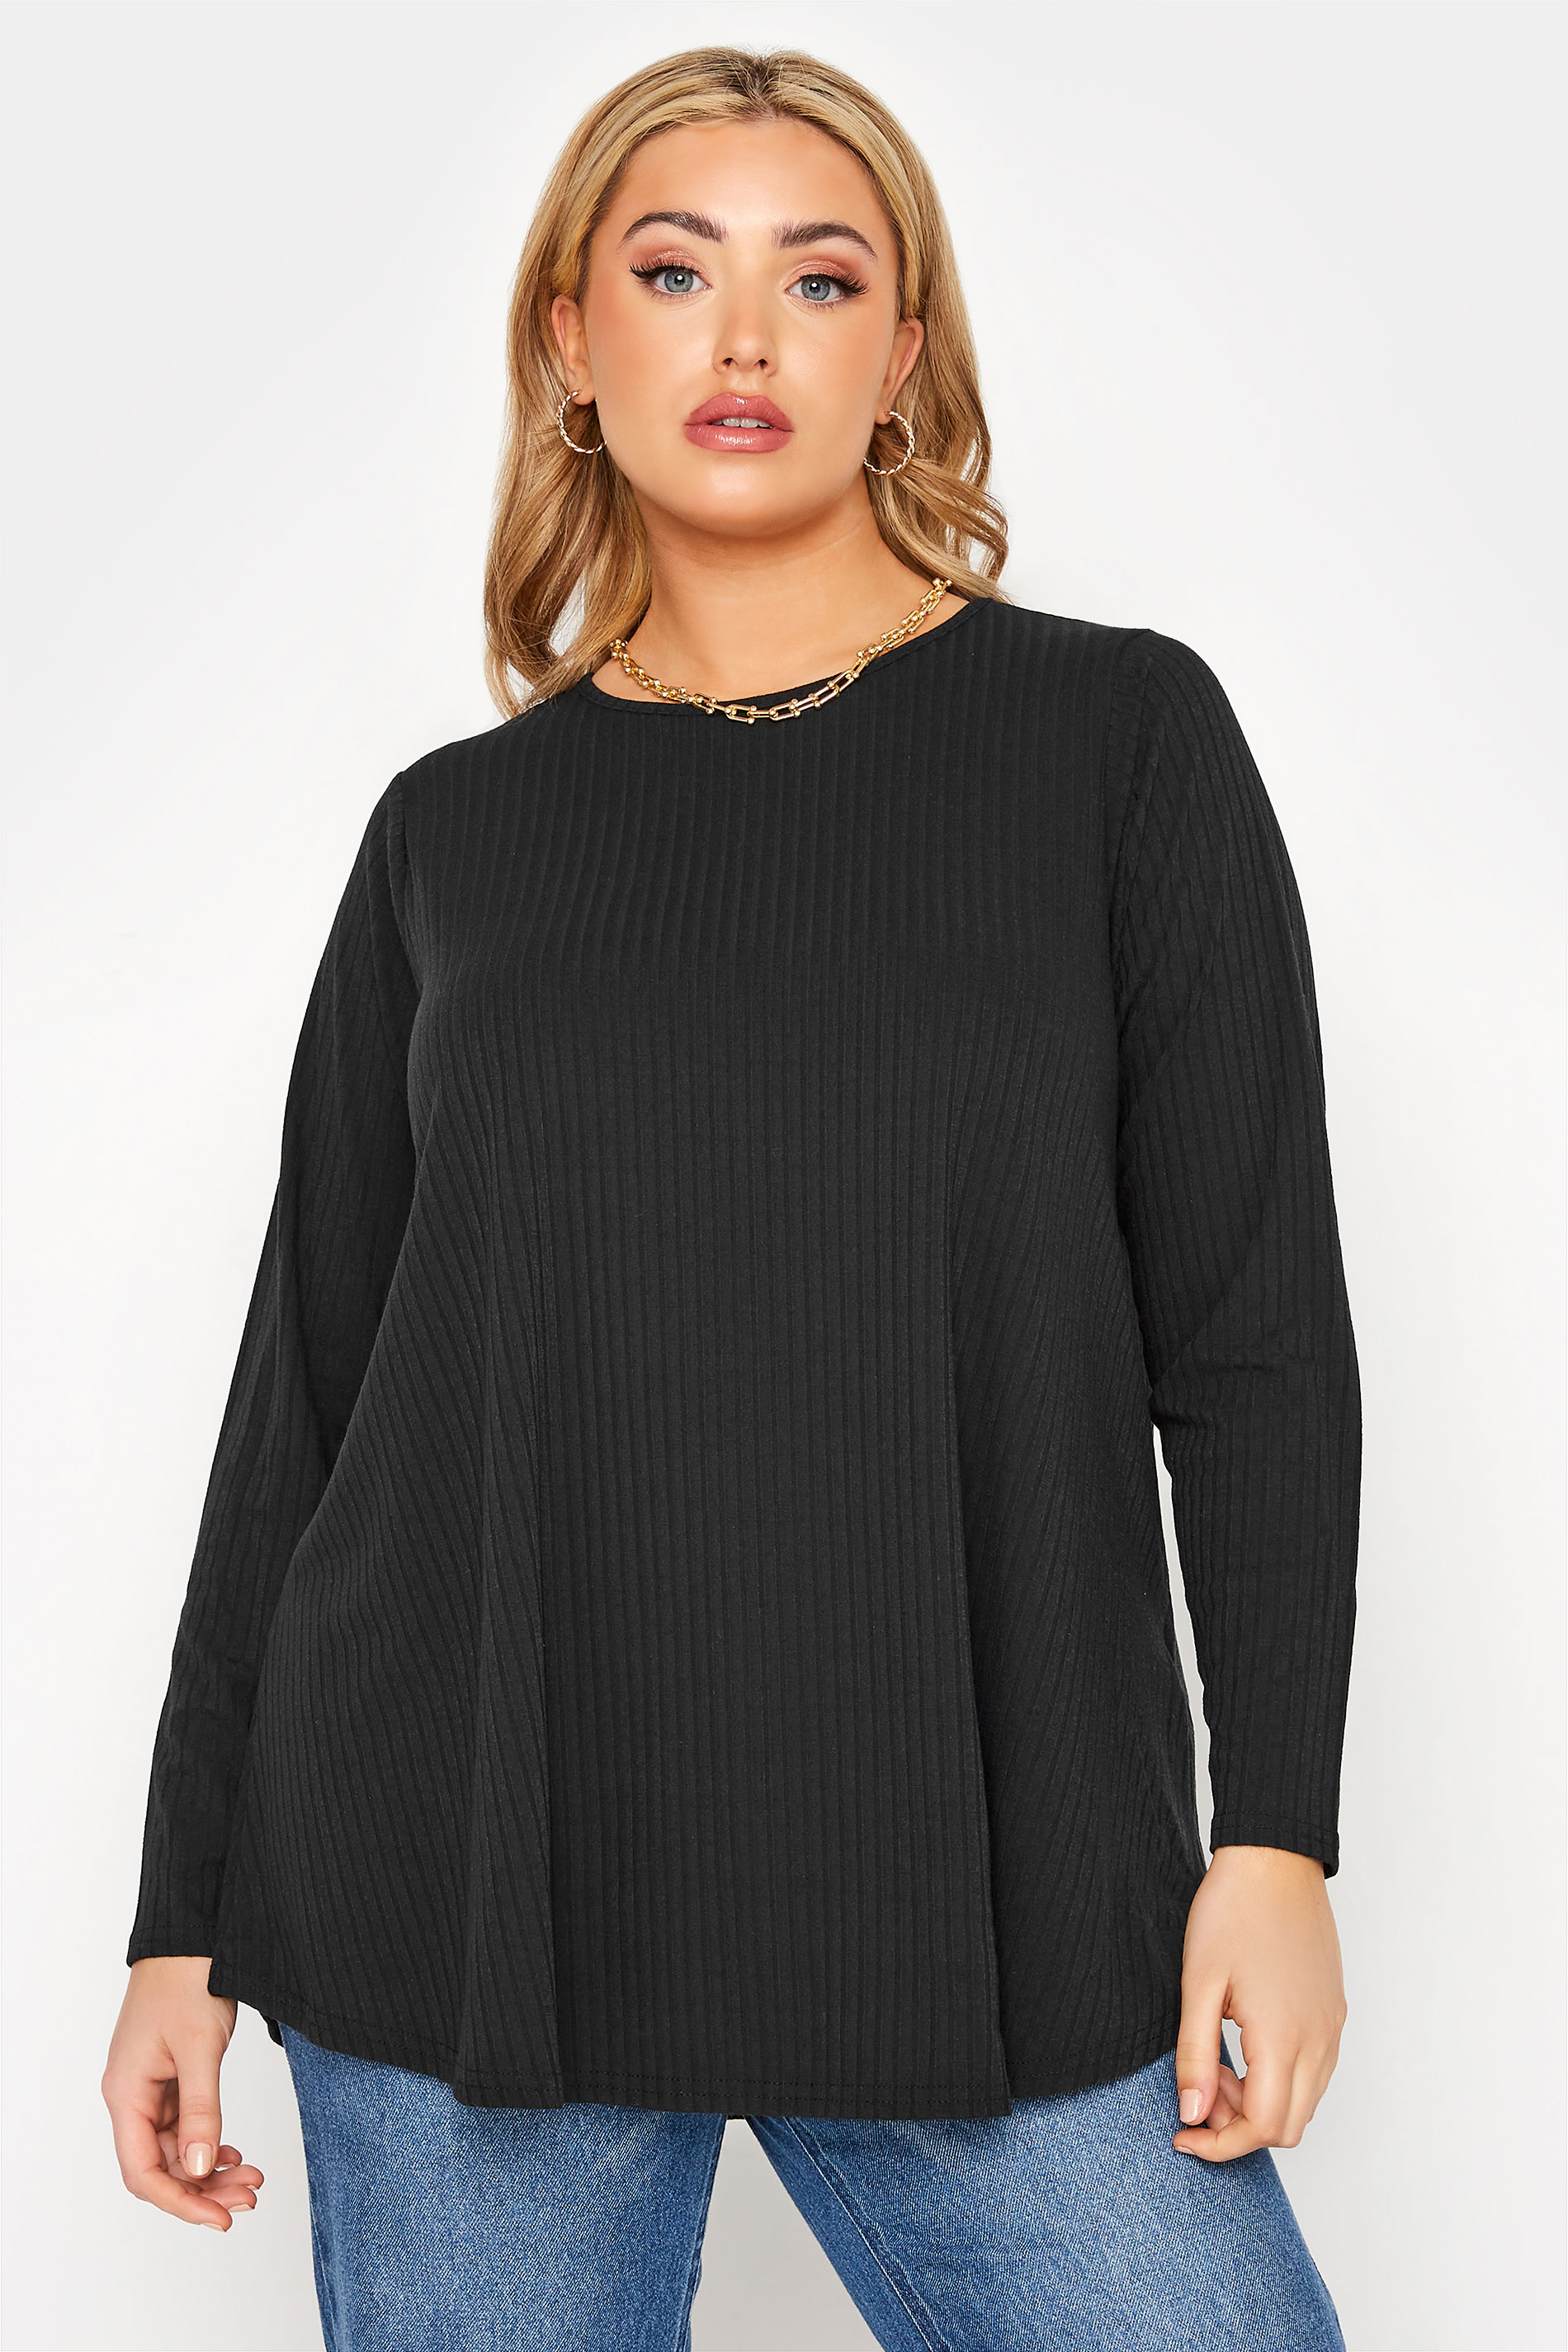 LIMITED COLLECTION Black Ribbed Long Sleeve Top | Yours Clothing 1